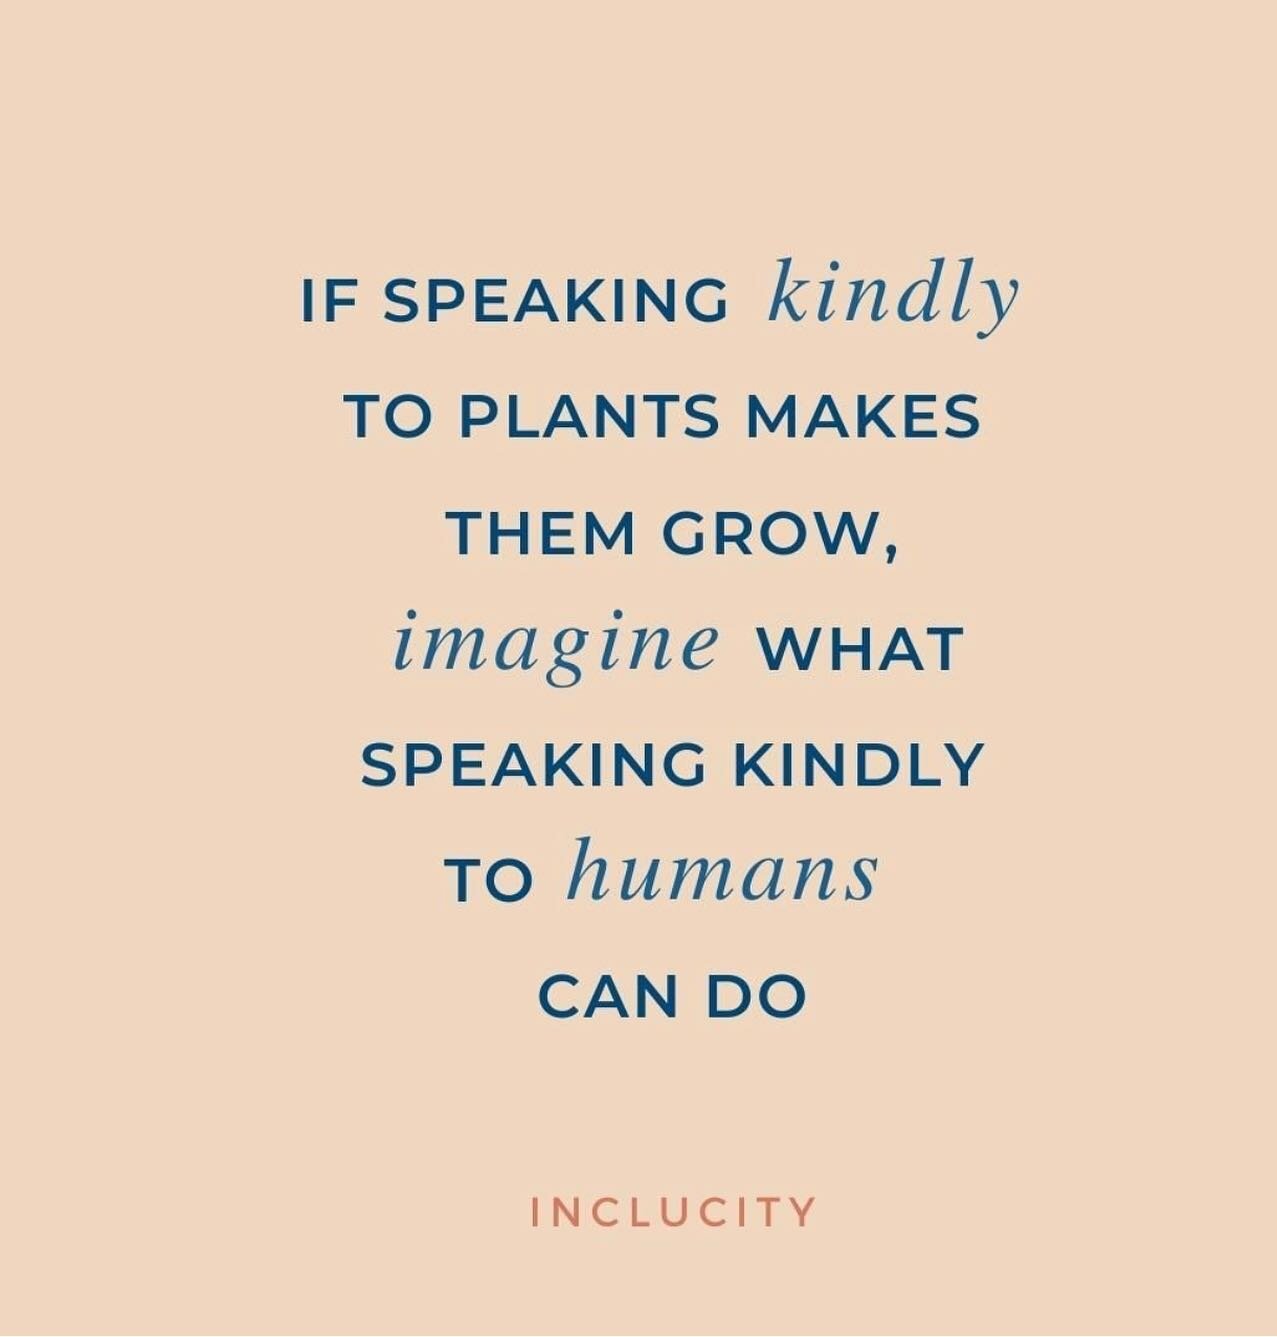 Happy World Kindness Day ✨#inclucity